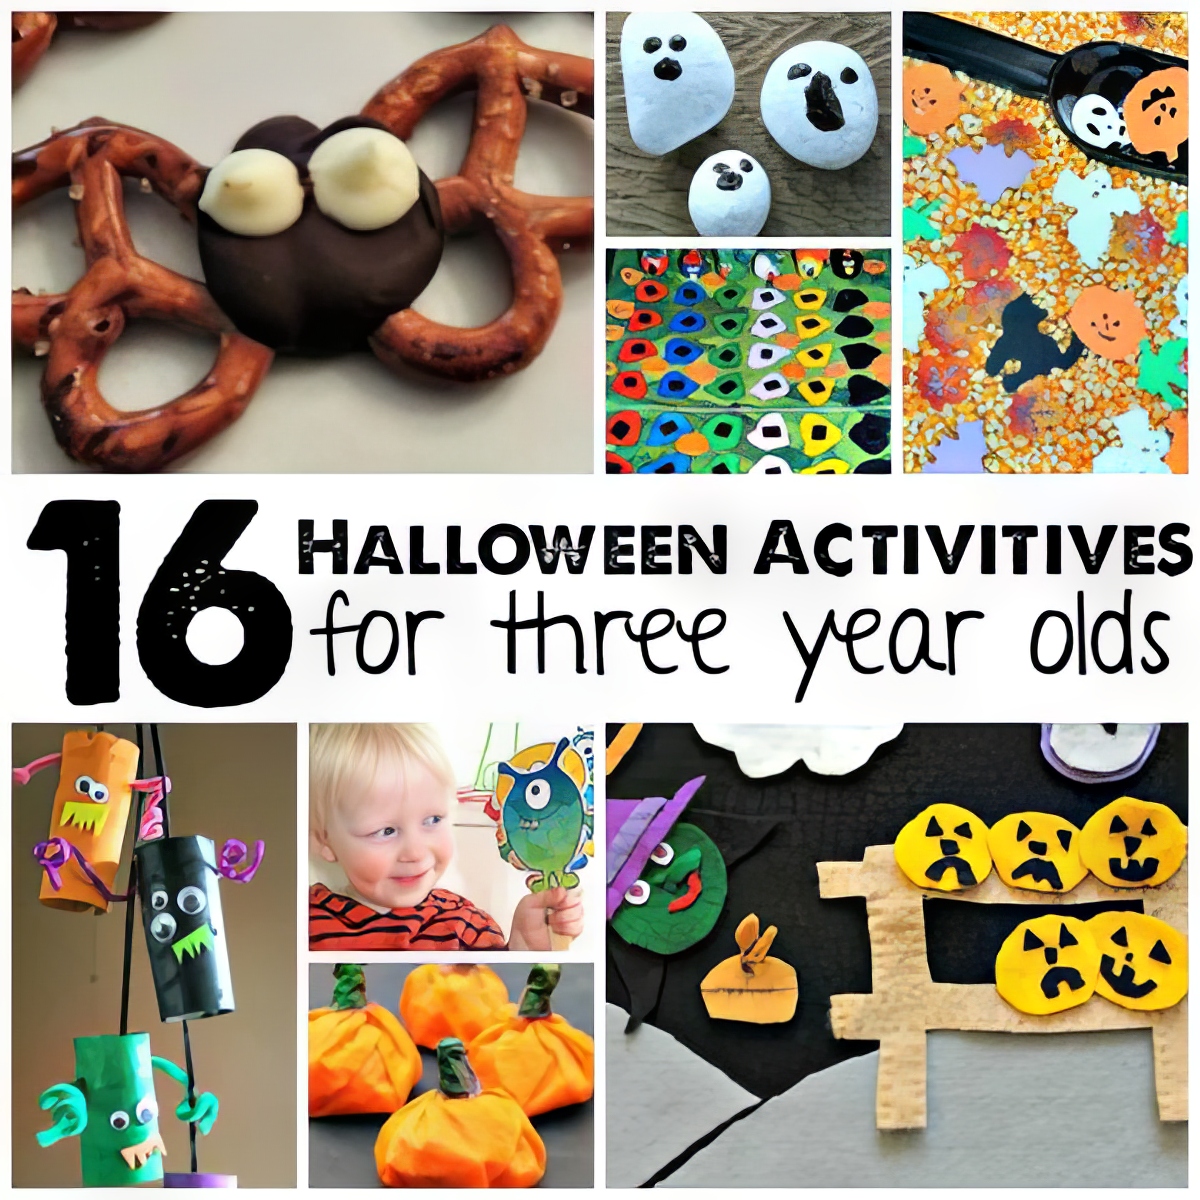 halloween activities for three year olds, fun Halloween activities for 3-year-olds